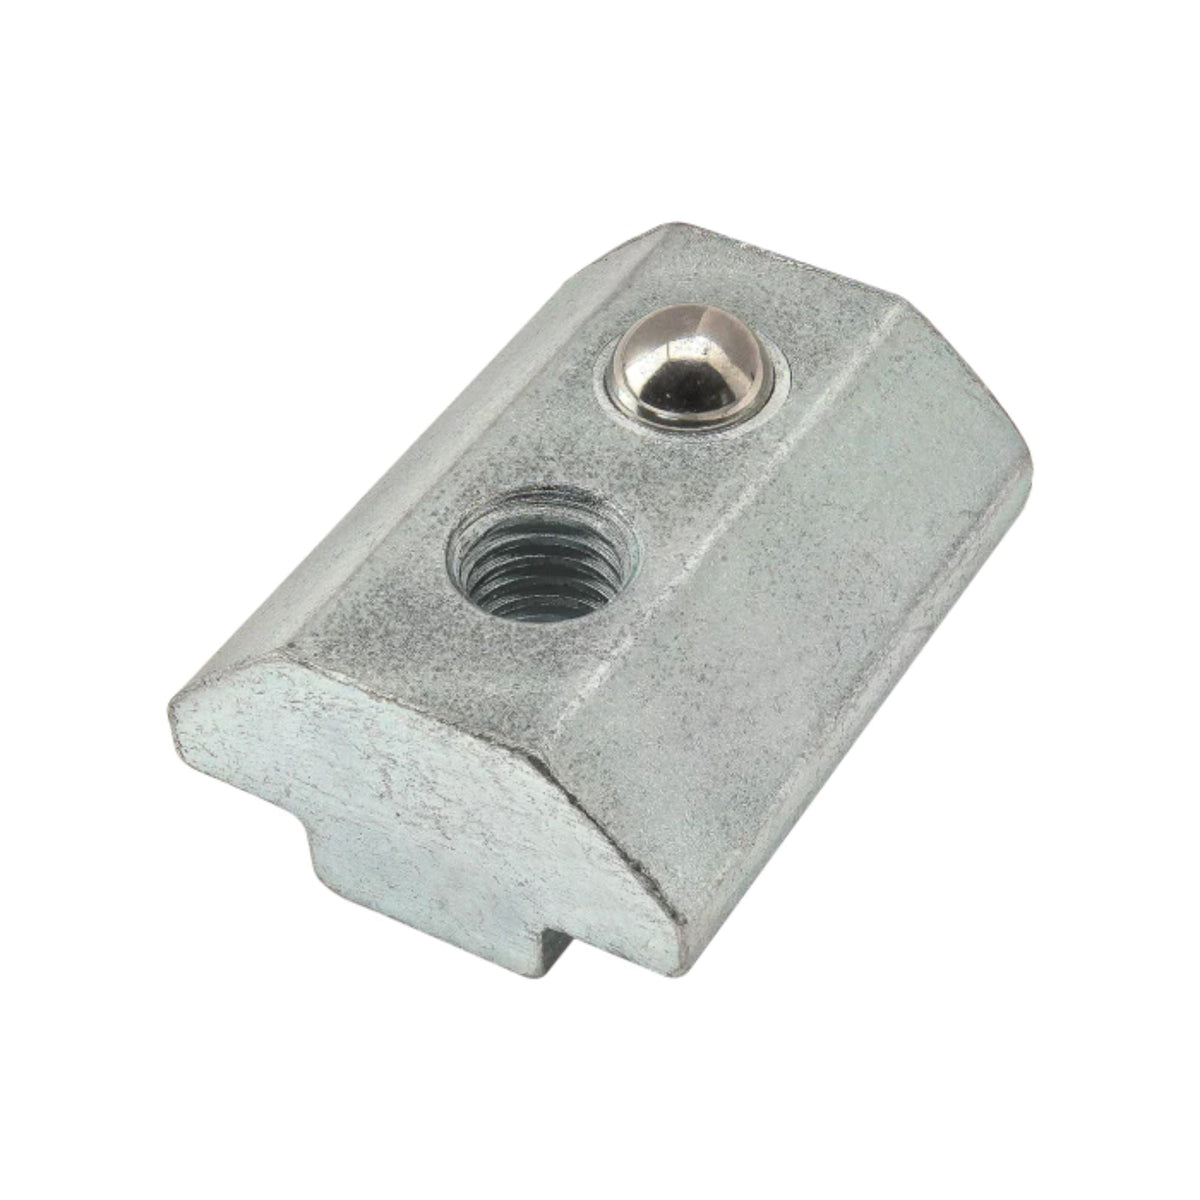 t-nut with angled sides and raised top, a threaded hole on one side on the top and a ball spring on the other side